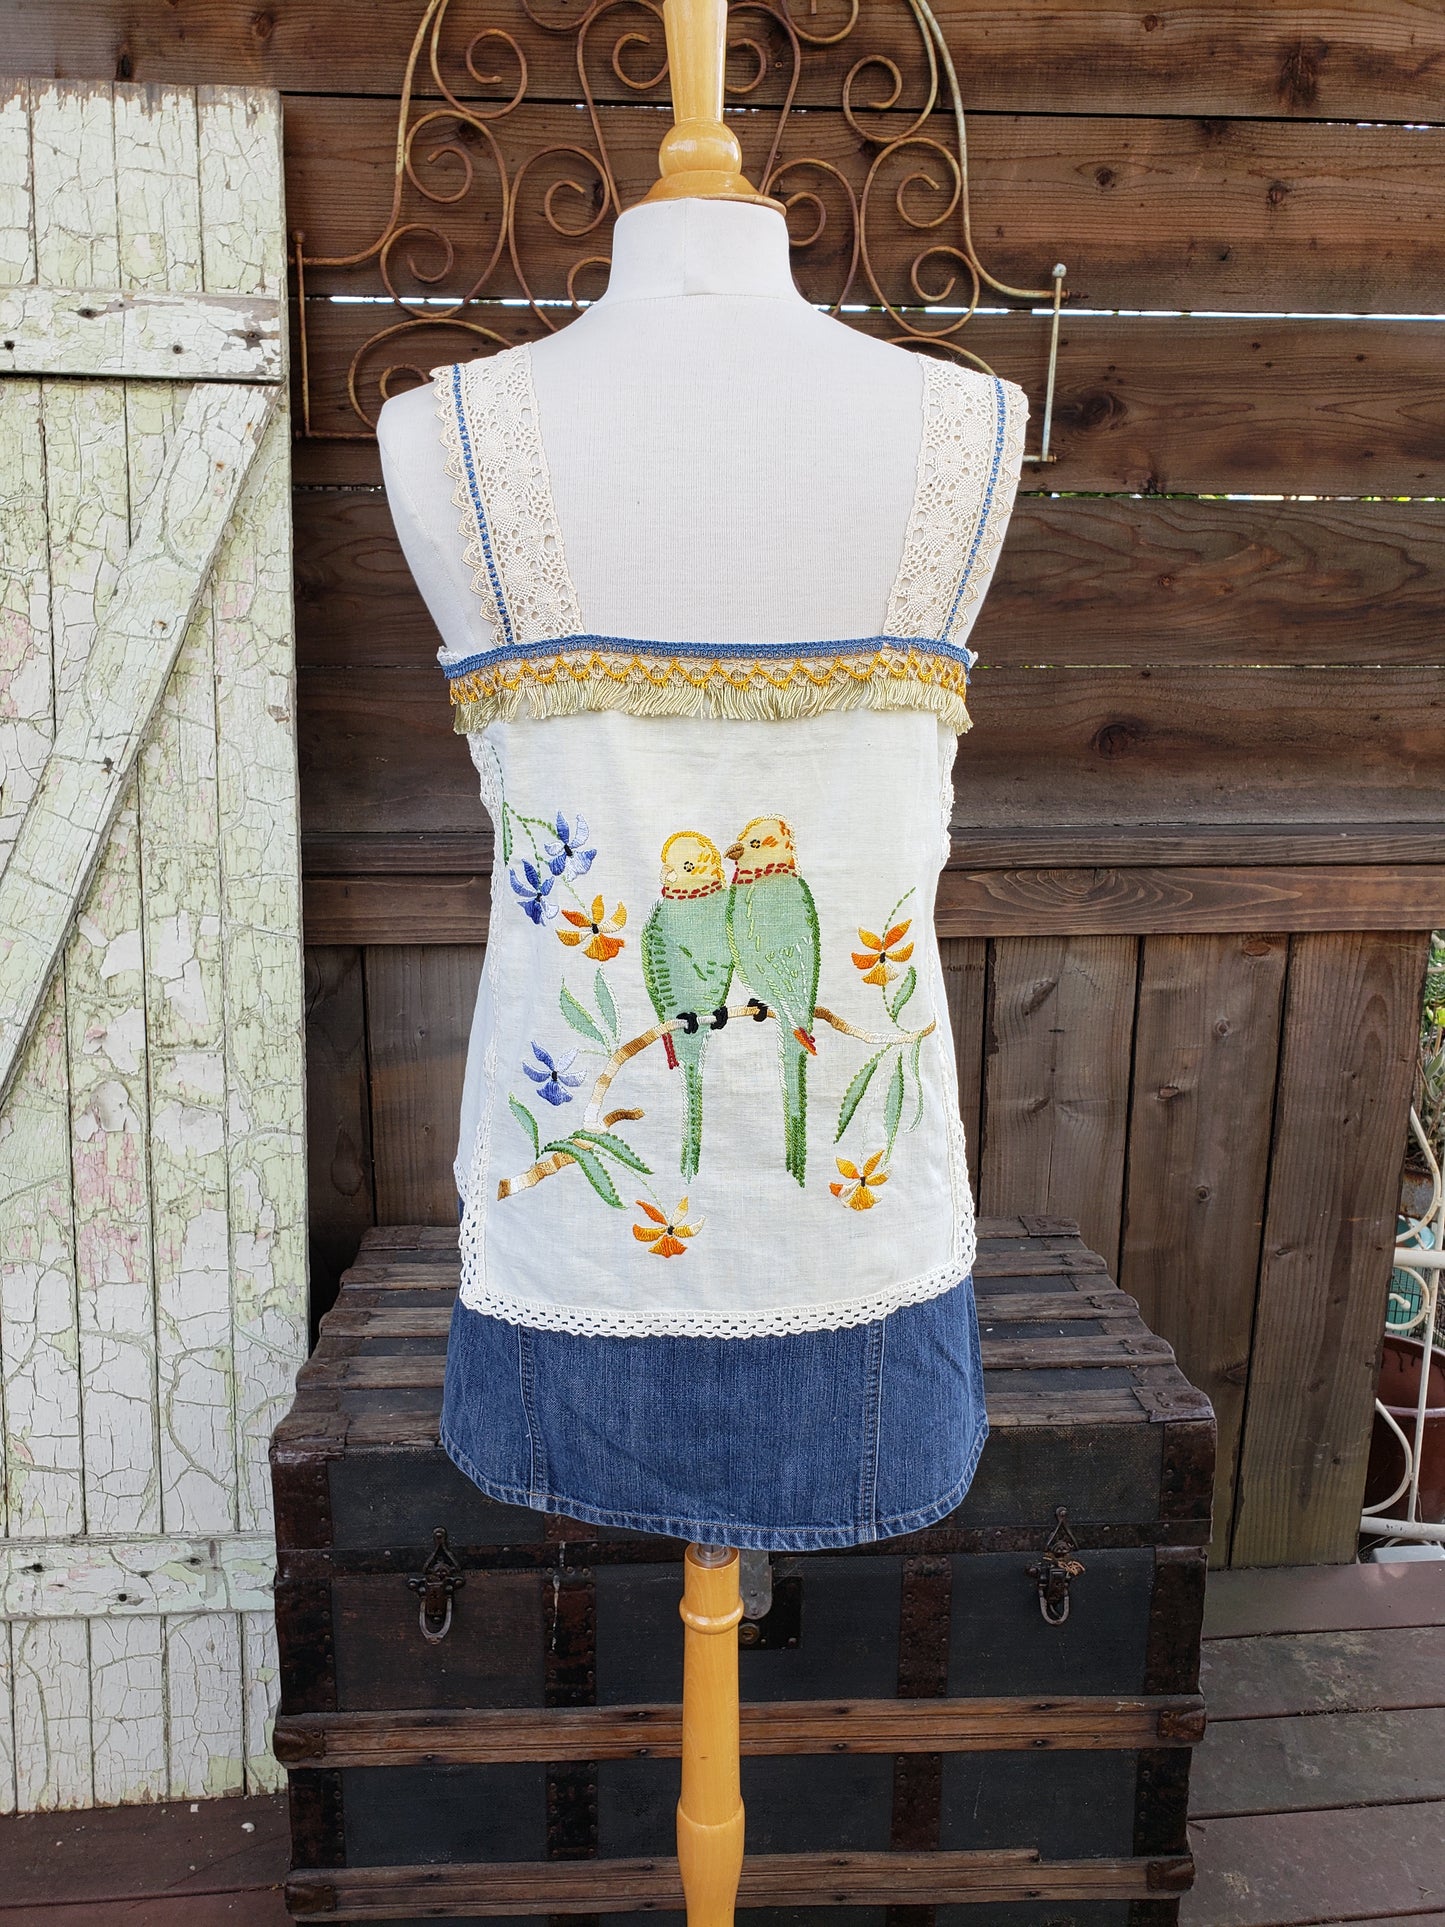 Embroidered vintage camisole with parrots